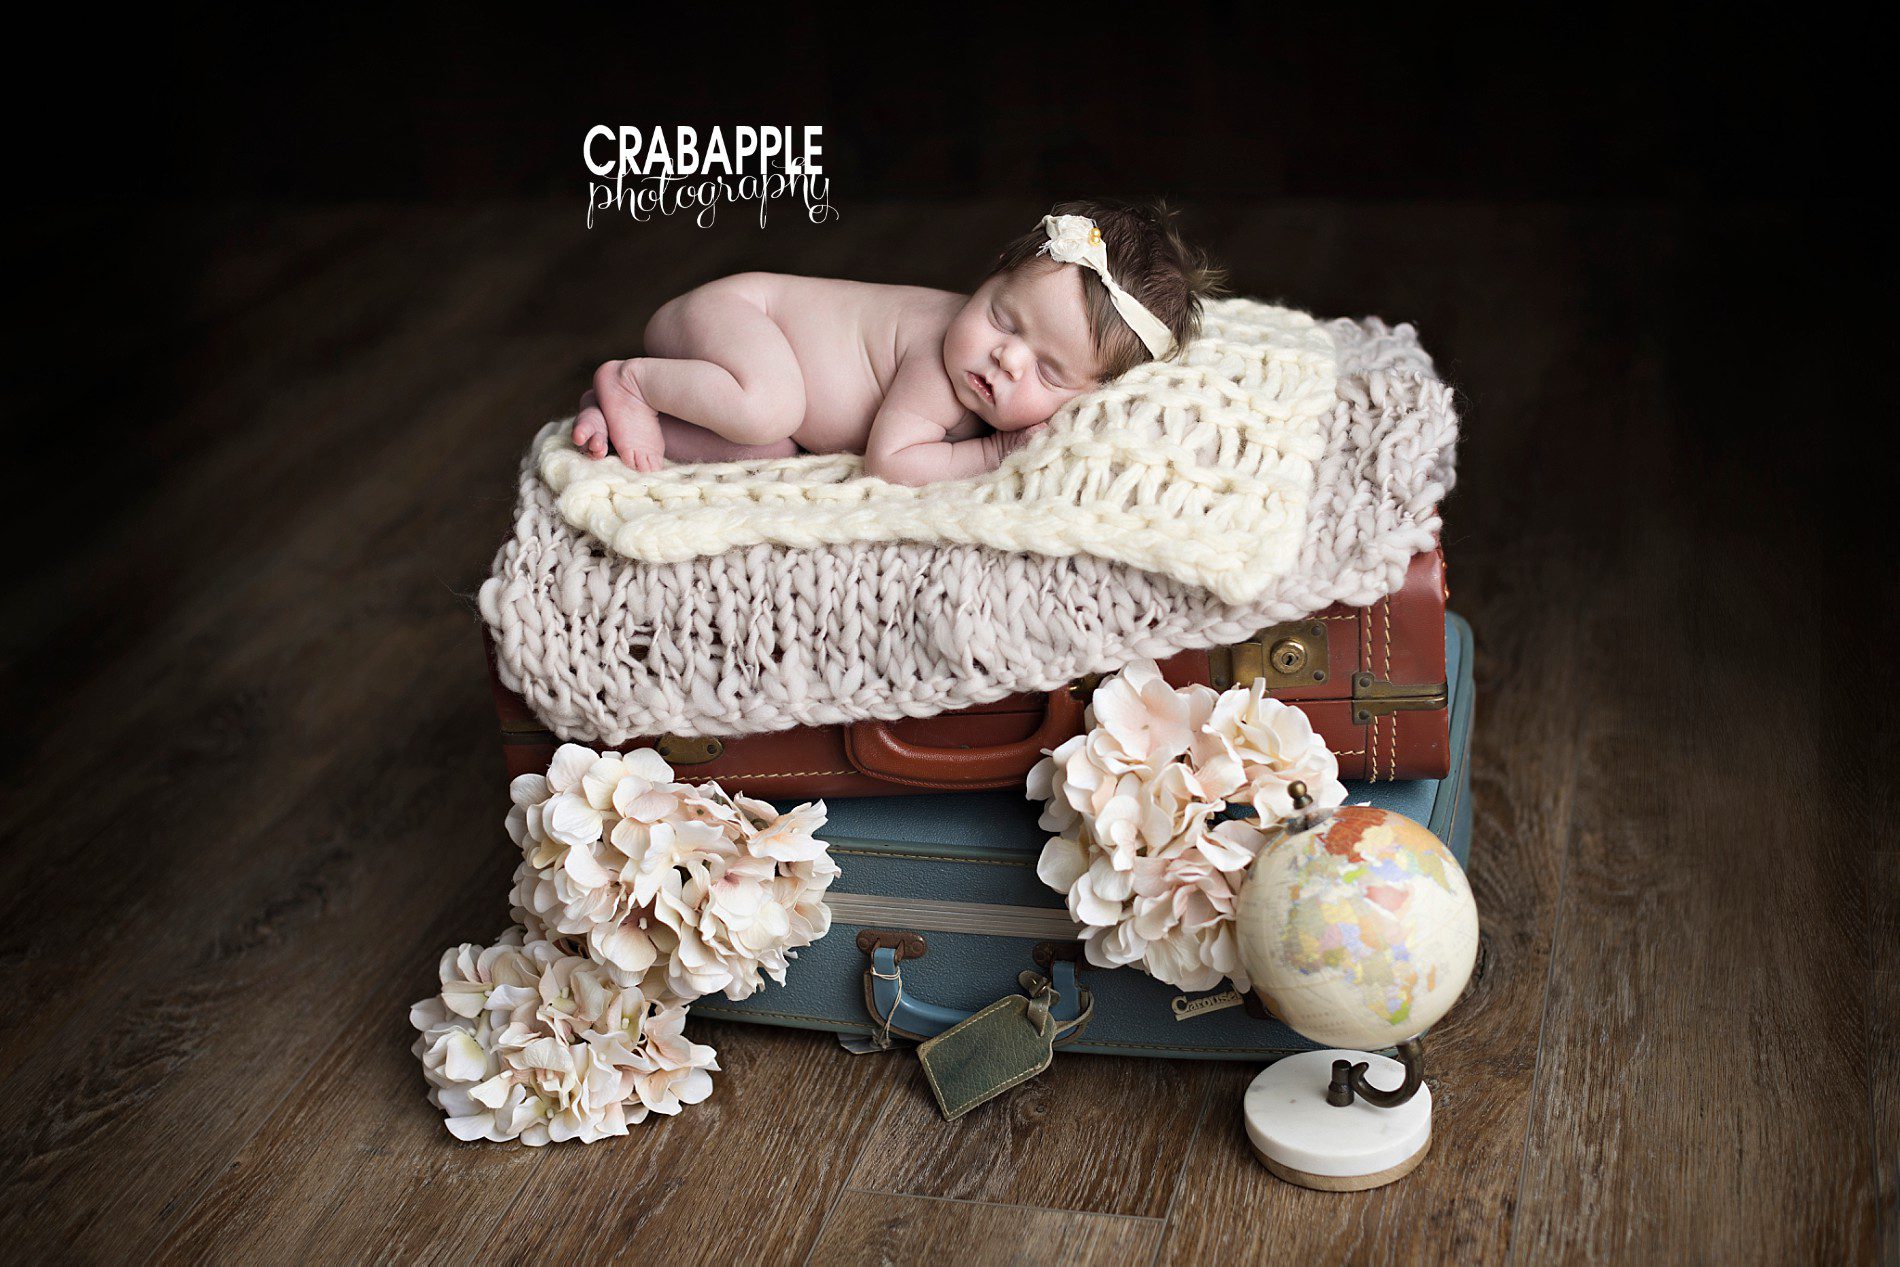 travel themed newborn photos for girls using vintage suitcases, luggage, globe, and flowers